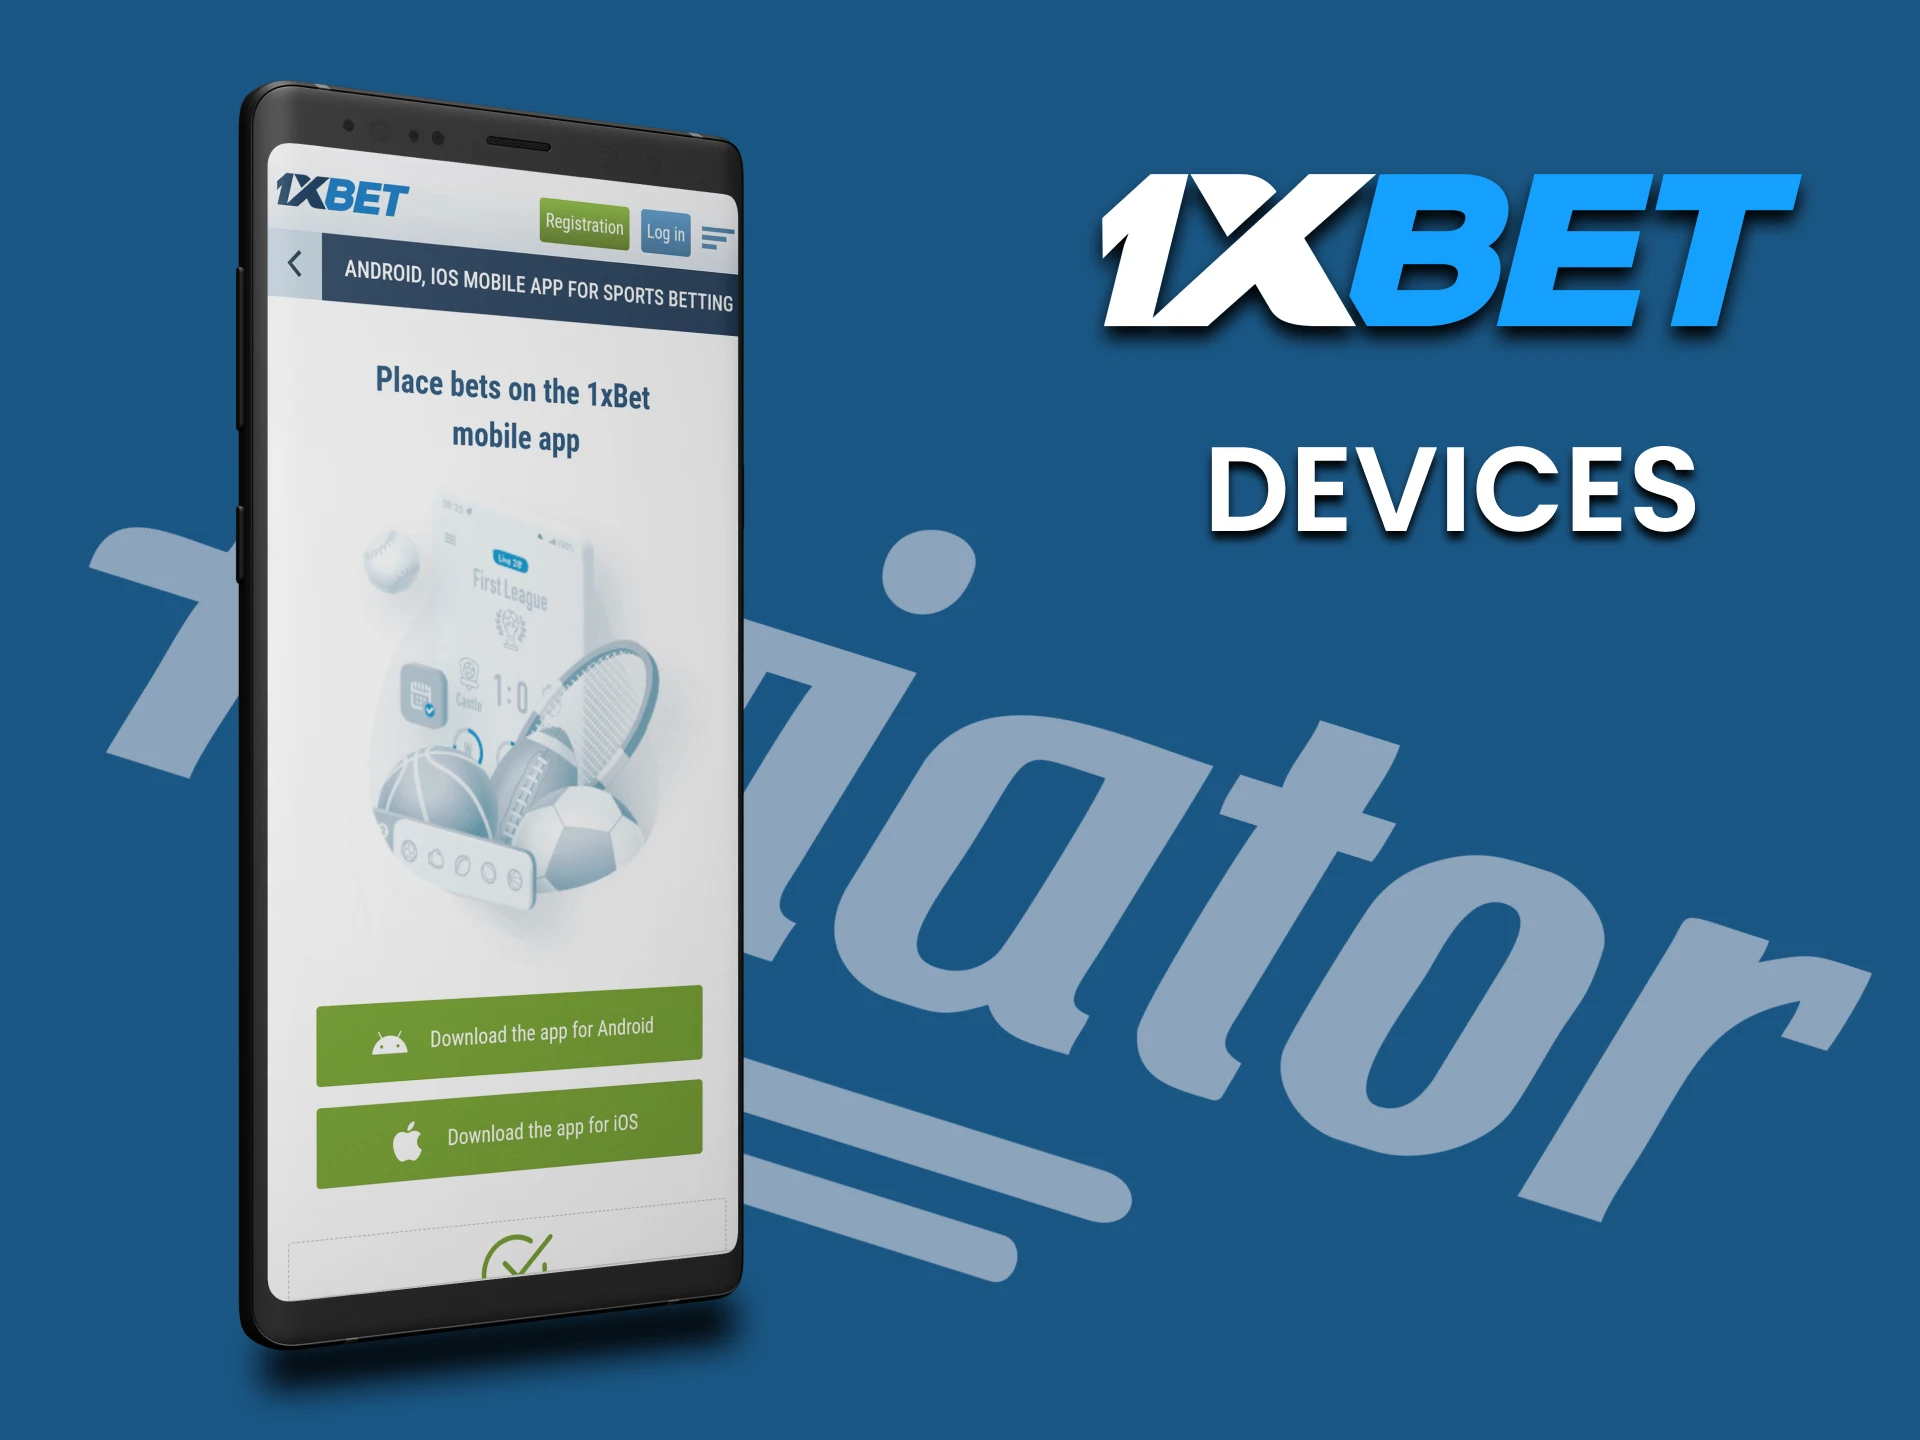 We will tell you on which devices you can download the 1xbet application to play Aviator.